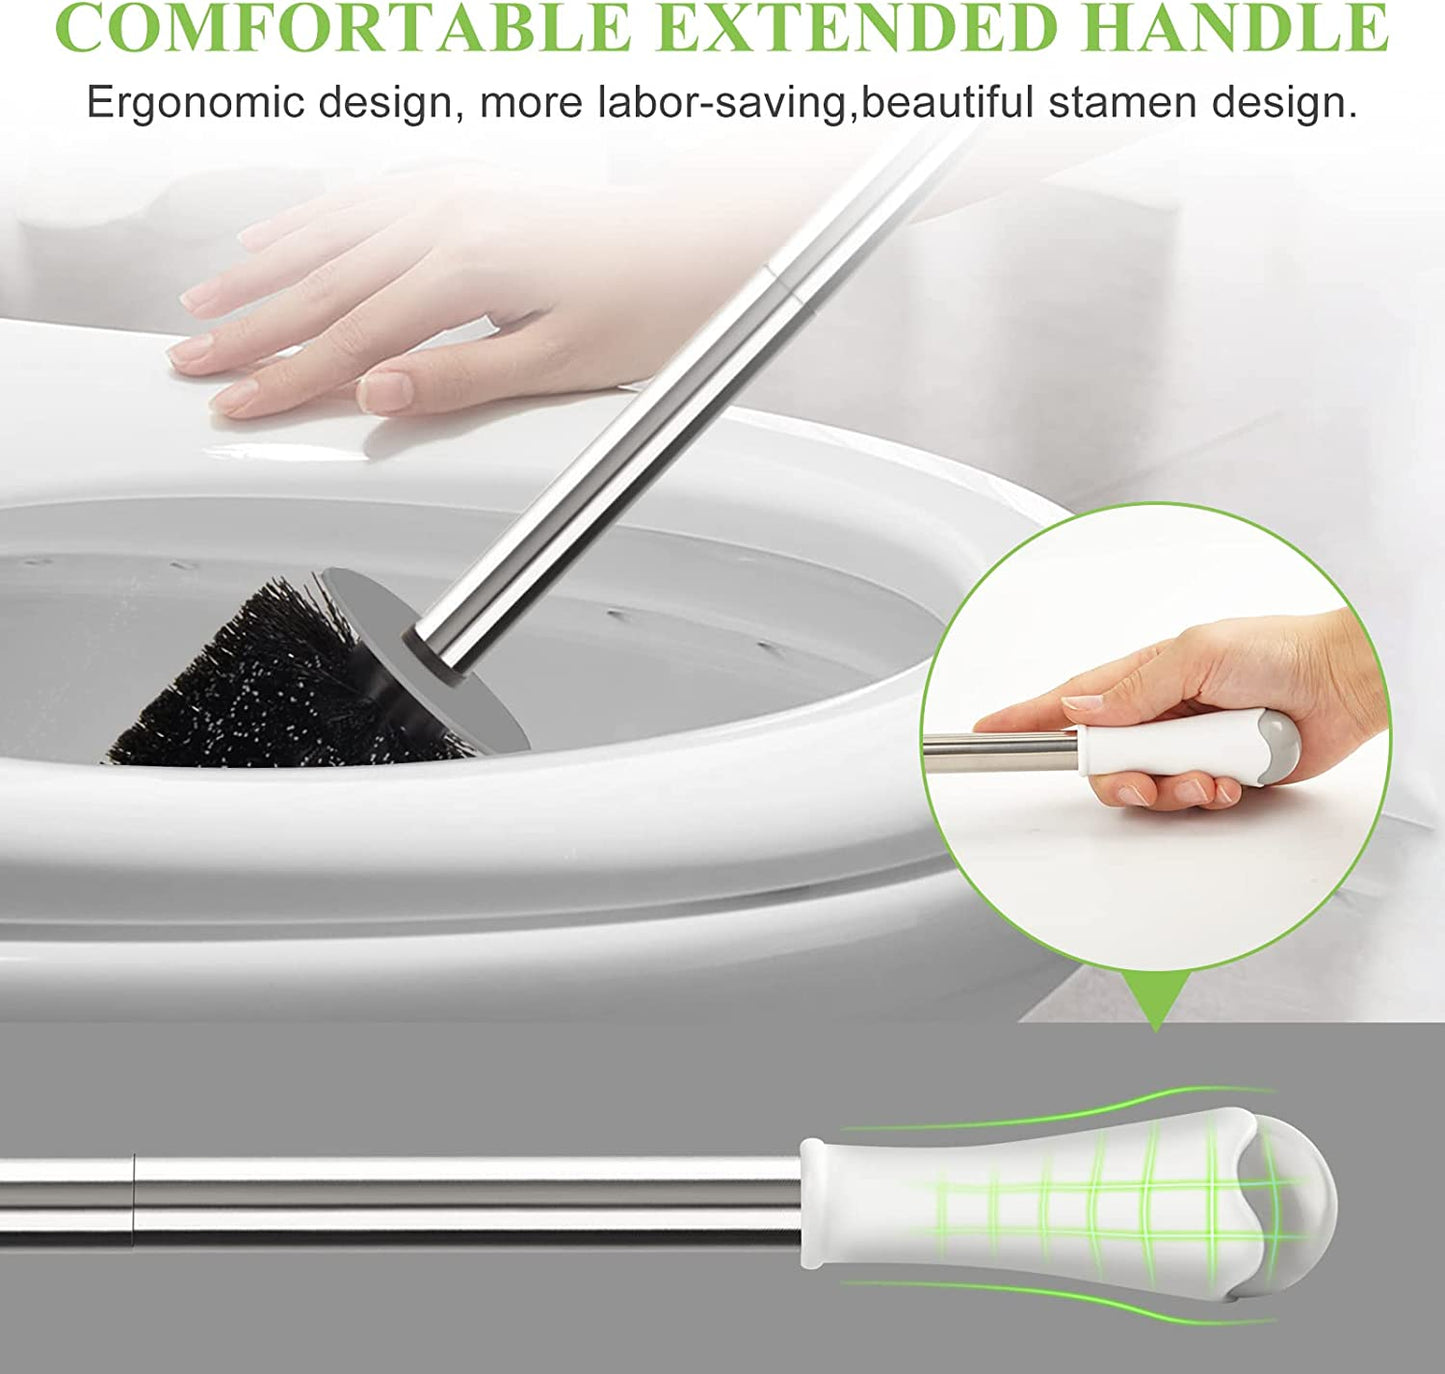 Toilet Brush and Holder, Compact Size Toilet Bowl Brush with Stainless Steel Handle, Small Size Plastic Holder Easy to Hide, Space Saving for Storage, Drip-Proof, Easy to Assemble, Deep Cleaning